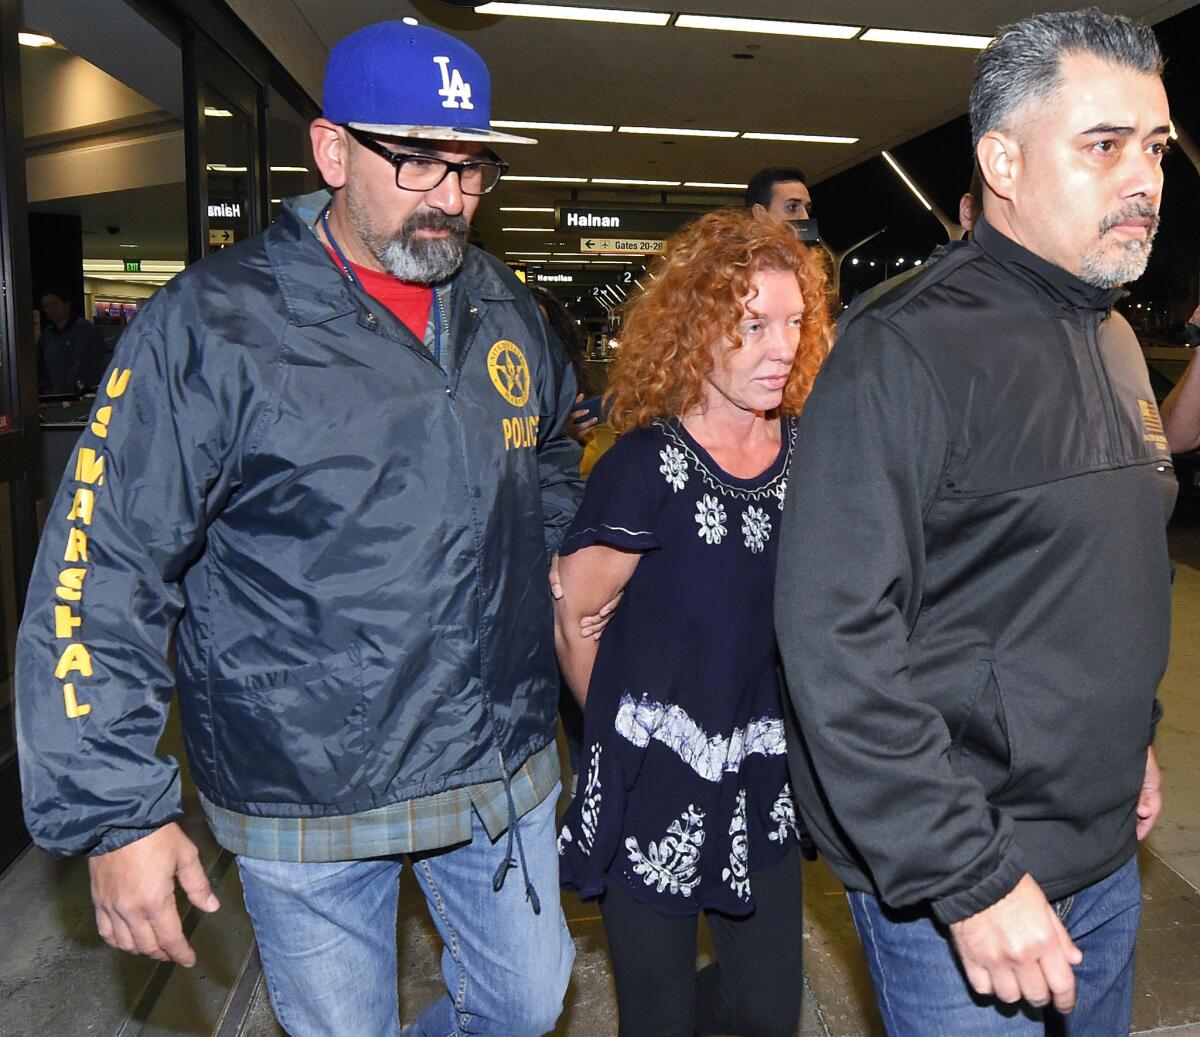 Tonya Couch, center, is taken by authorities to a waiting car after arriving at Los Angeles International Airport on Thursday in Los Angeles.